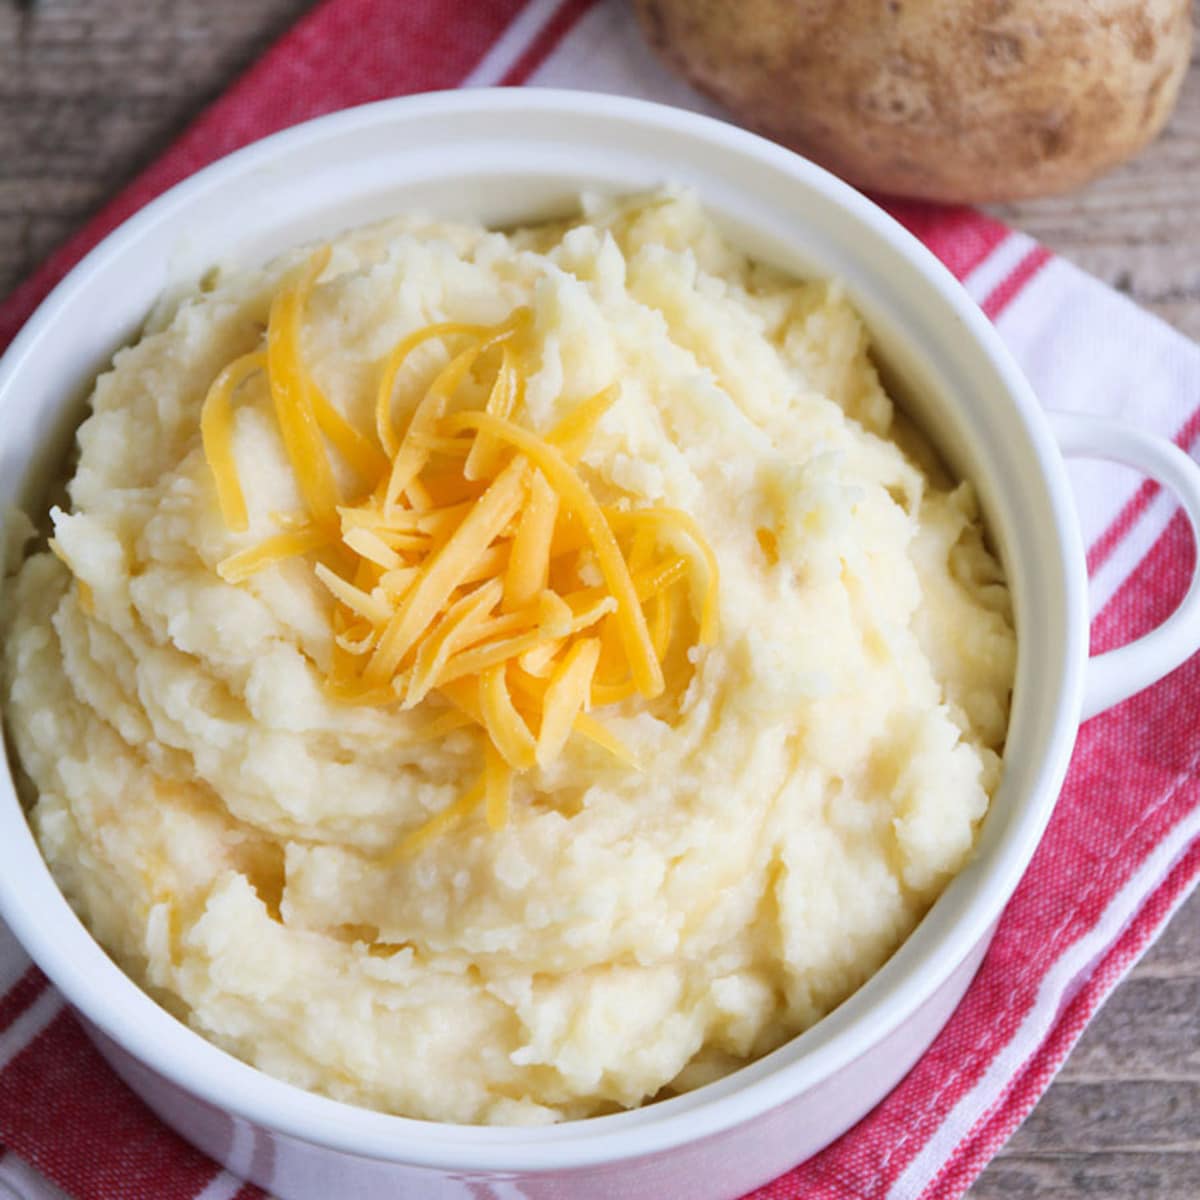 Christmas side dishes - slow cooker mashed potatoes topped with shredded cheese.